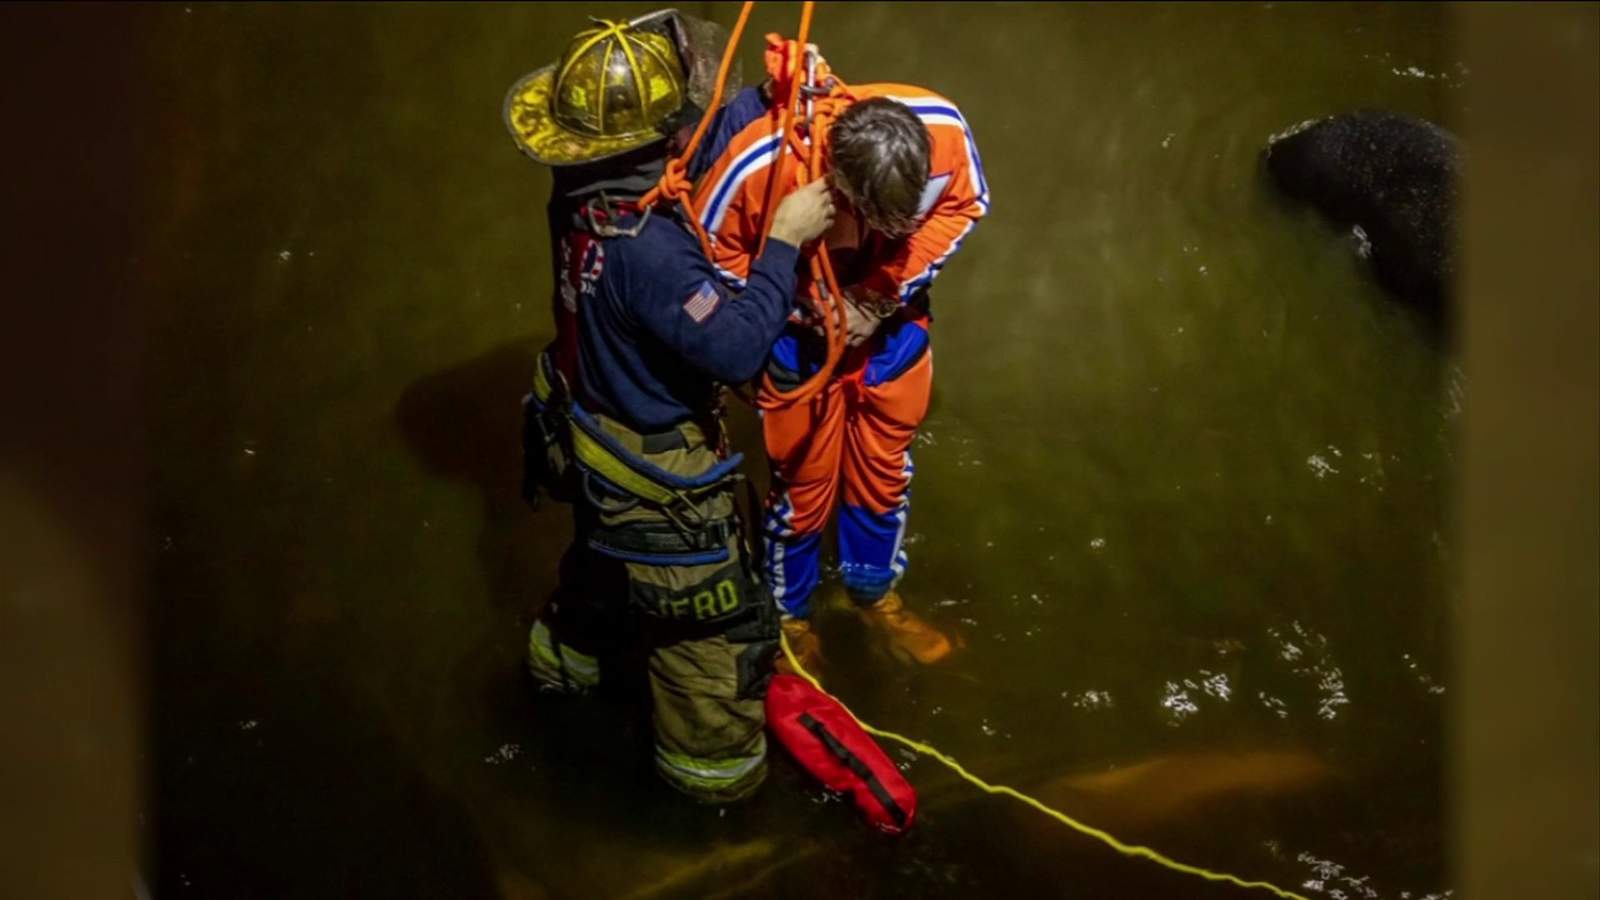 Hypothermia, rising tide among dangers as firefighters rescue man from St. Johns River